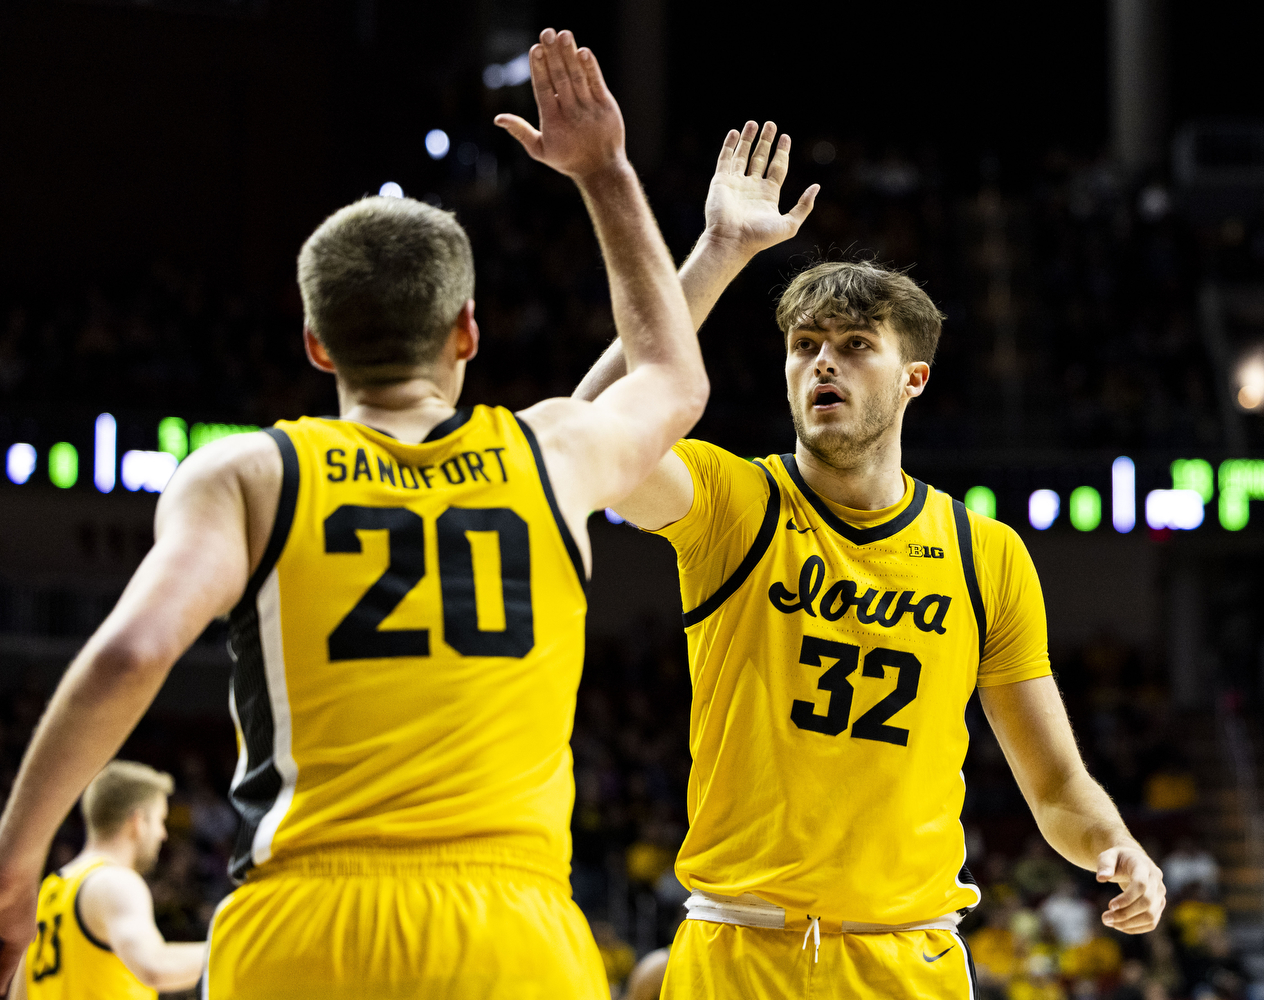 Iowa forward Payton Sandfort and Iowa forward Owen Freeman high five during game one of the Hy-Vee Hawkeye Showcase between Iowa men’s basketball and Florida A&M at Wells Fargo Arena in Des Moines, Iowa, on Saturday, Dec. 16, 2023. The Hawkeyes defeated the Rattlers 88-52.